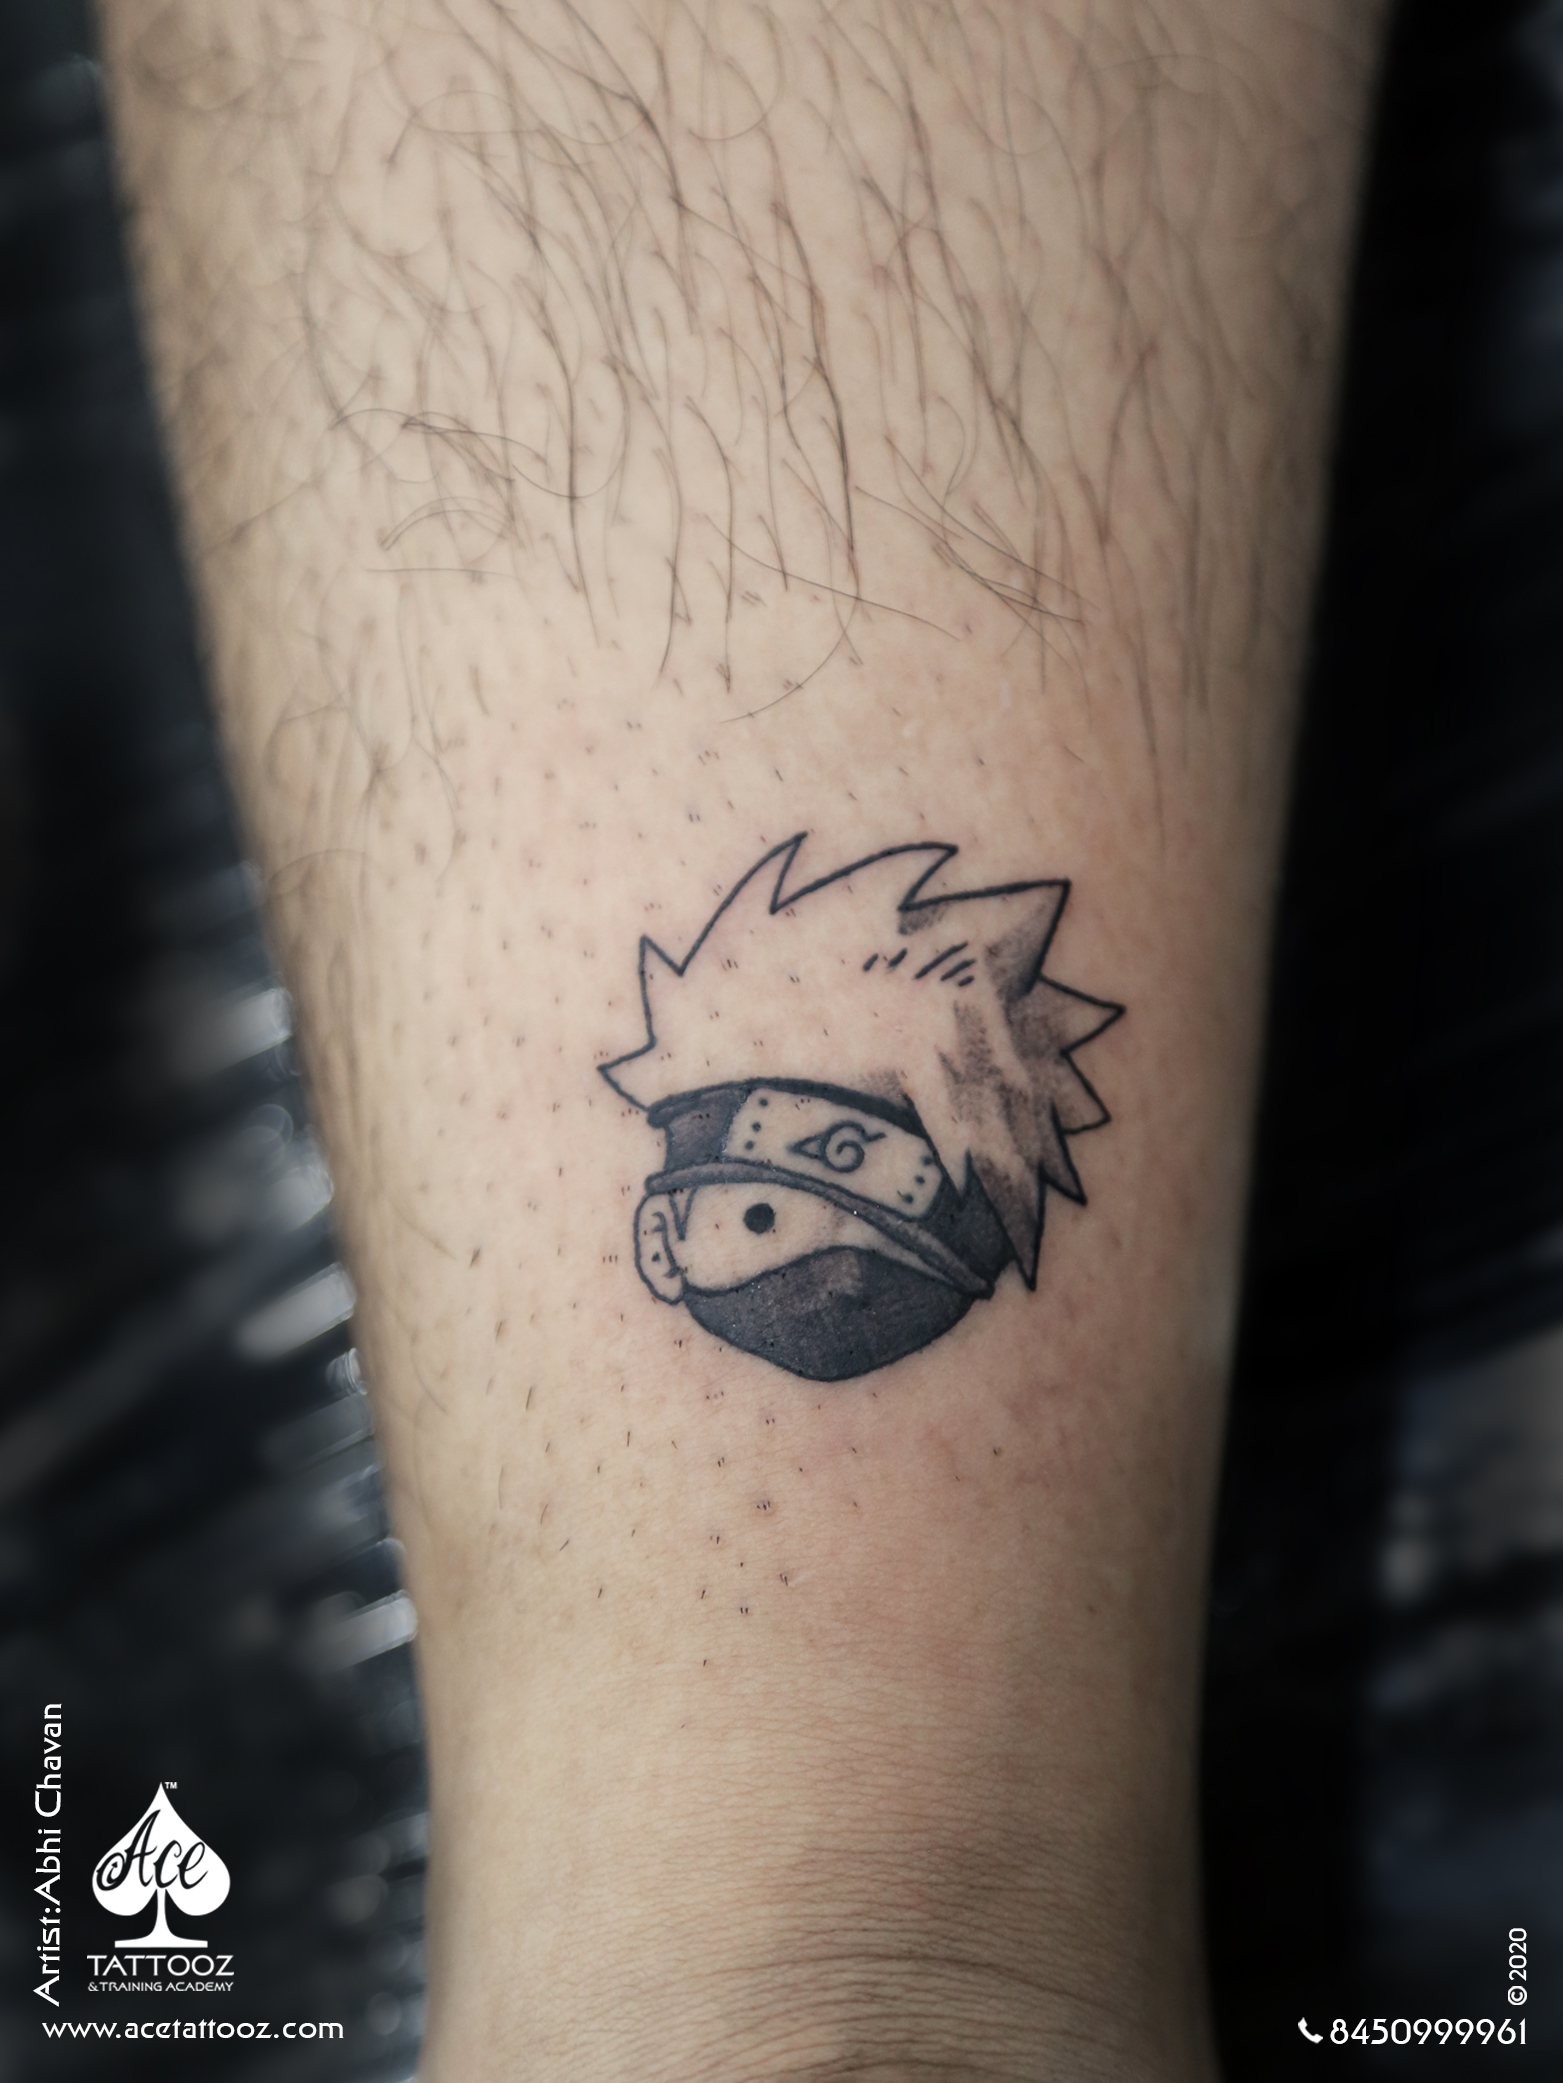 Tattoo tagged with: fine line, small, spartan, tiny, ifttt, little,  shoulder, soltattoo, medium size, other | inked-app.com